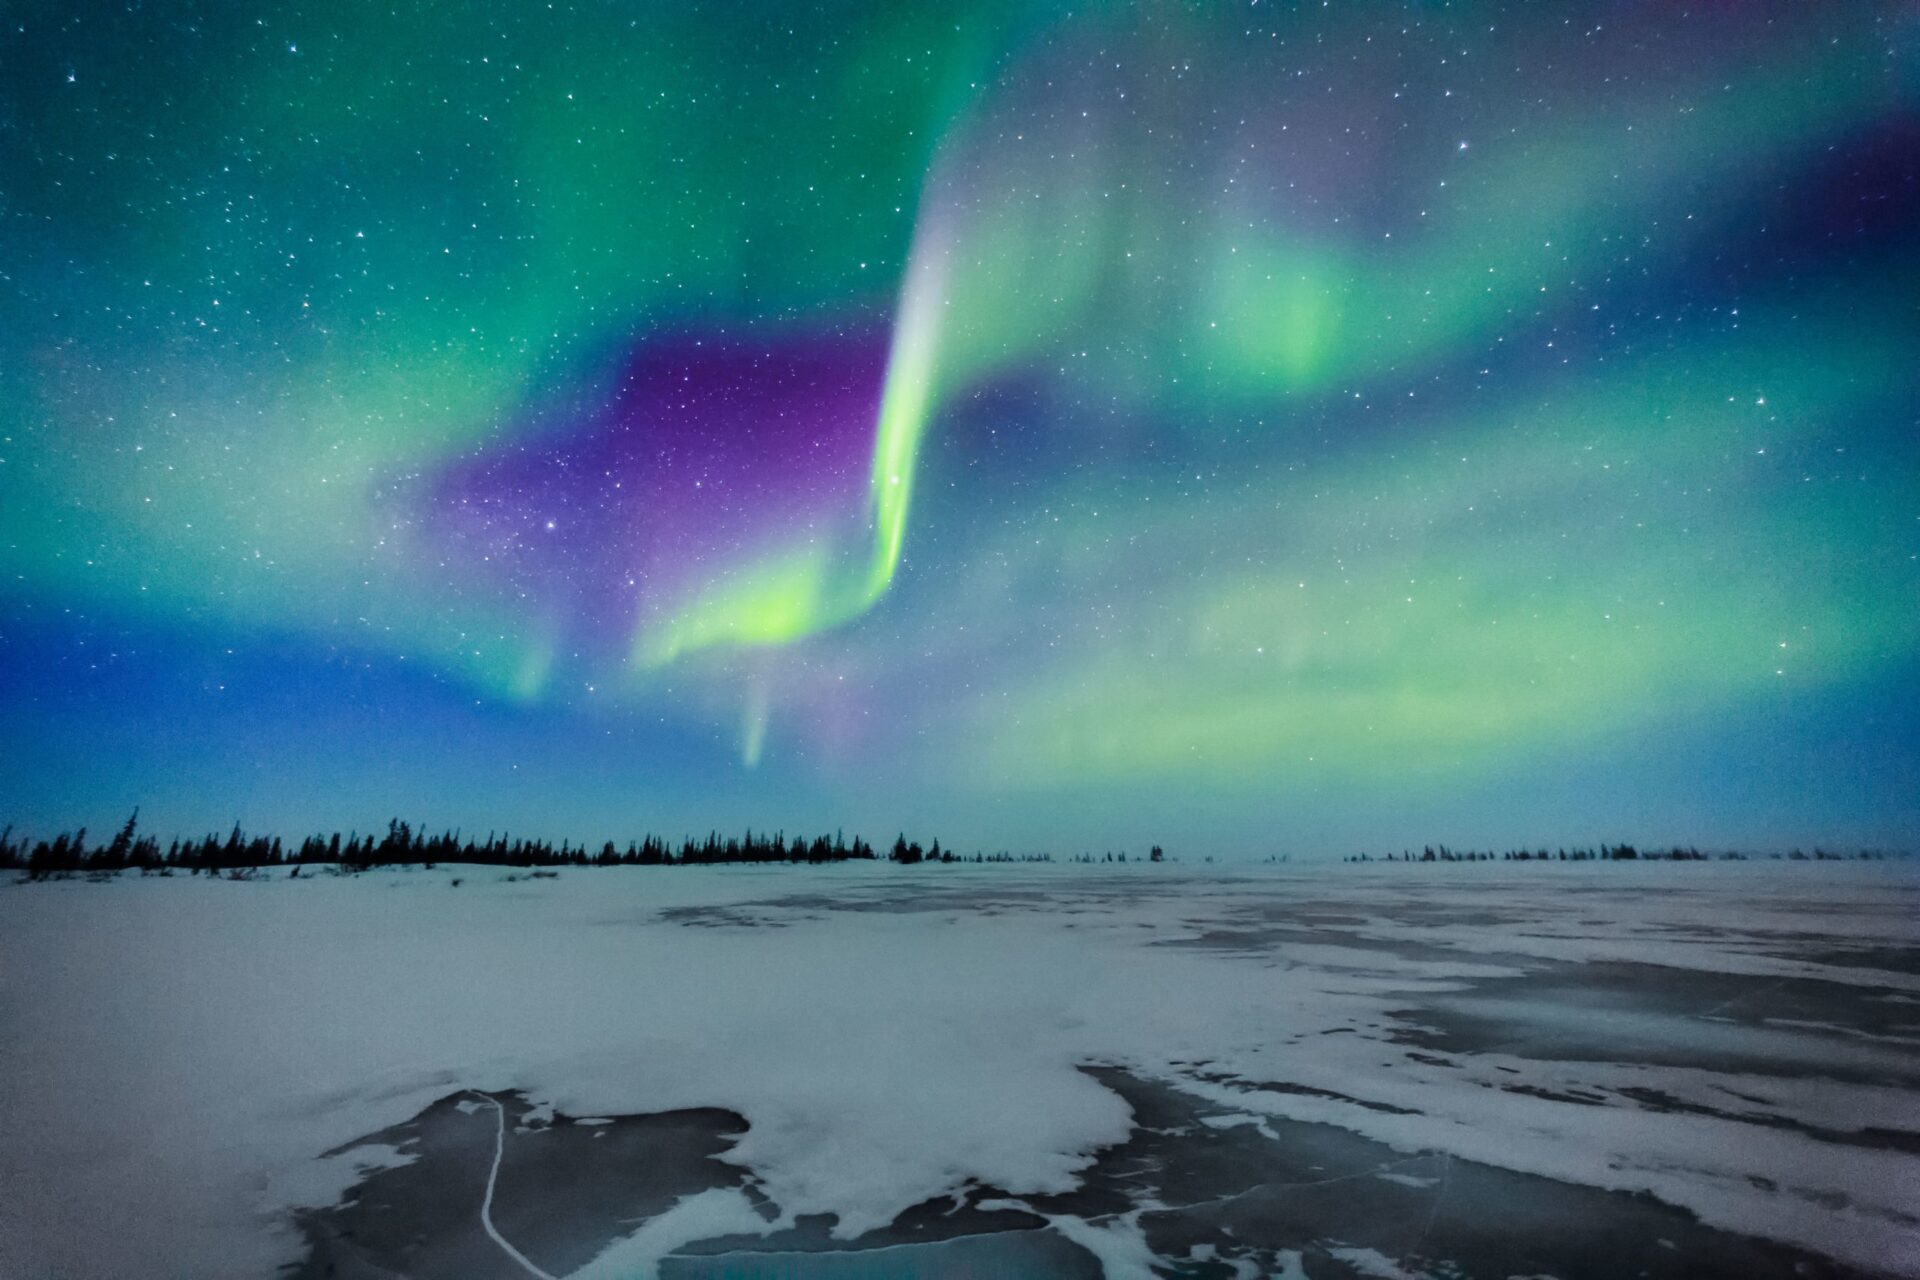 Northern Lights display over a frozen lake in Canada's High Arctic